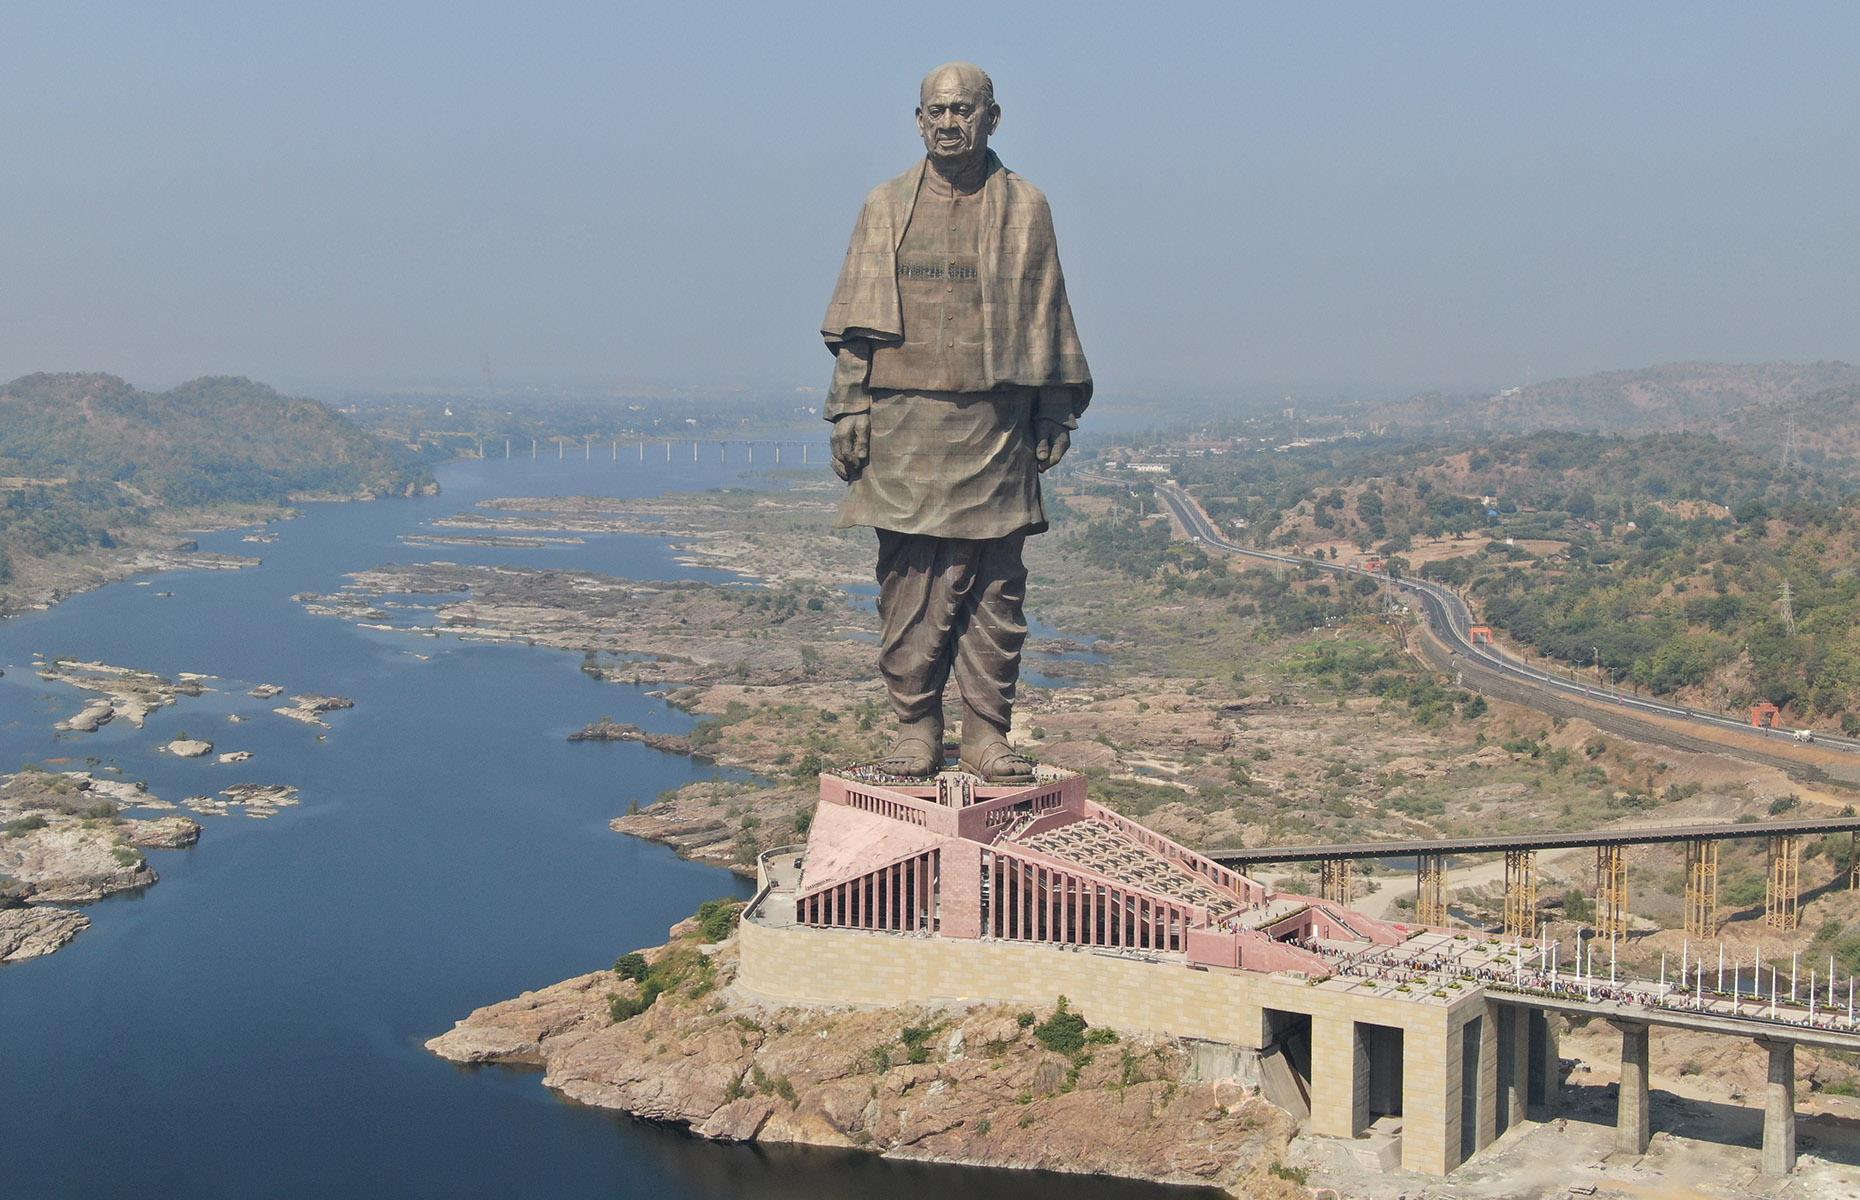 <p>Standing watch over the Narmada River in Gujarat, the colossal Statue of Unity looks more like something out of <em>The Lord of the Rings</em> than anything made by human hands. Completed in 2018, this copper-and-cement depiction of Indian statesman Sardar Vallabhbhai Patel is the tallest statue in the world, towering 597 feet above its surroundings. One of the nation's founding fathers, the so-called 'Iron Man of India' played a key role in integrating the country's diverse provinces and states.</p>  <p><a href="https://www.loveexploring.com/galleries/72892/the-worlds-tallest-hotels-with-breathtaking-views?page=1"><strong>Now check out the highest hotel rooms in the world</strong></a></p>  <p><span><strong>Liked this? Click on the Follow button above for more great stories from loveEXPLORING</strong></span></p>